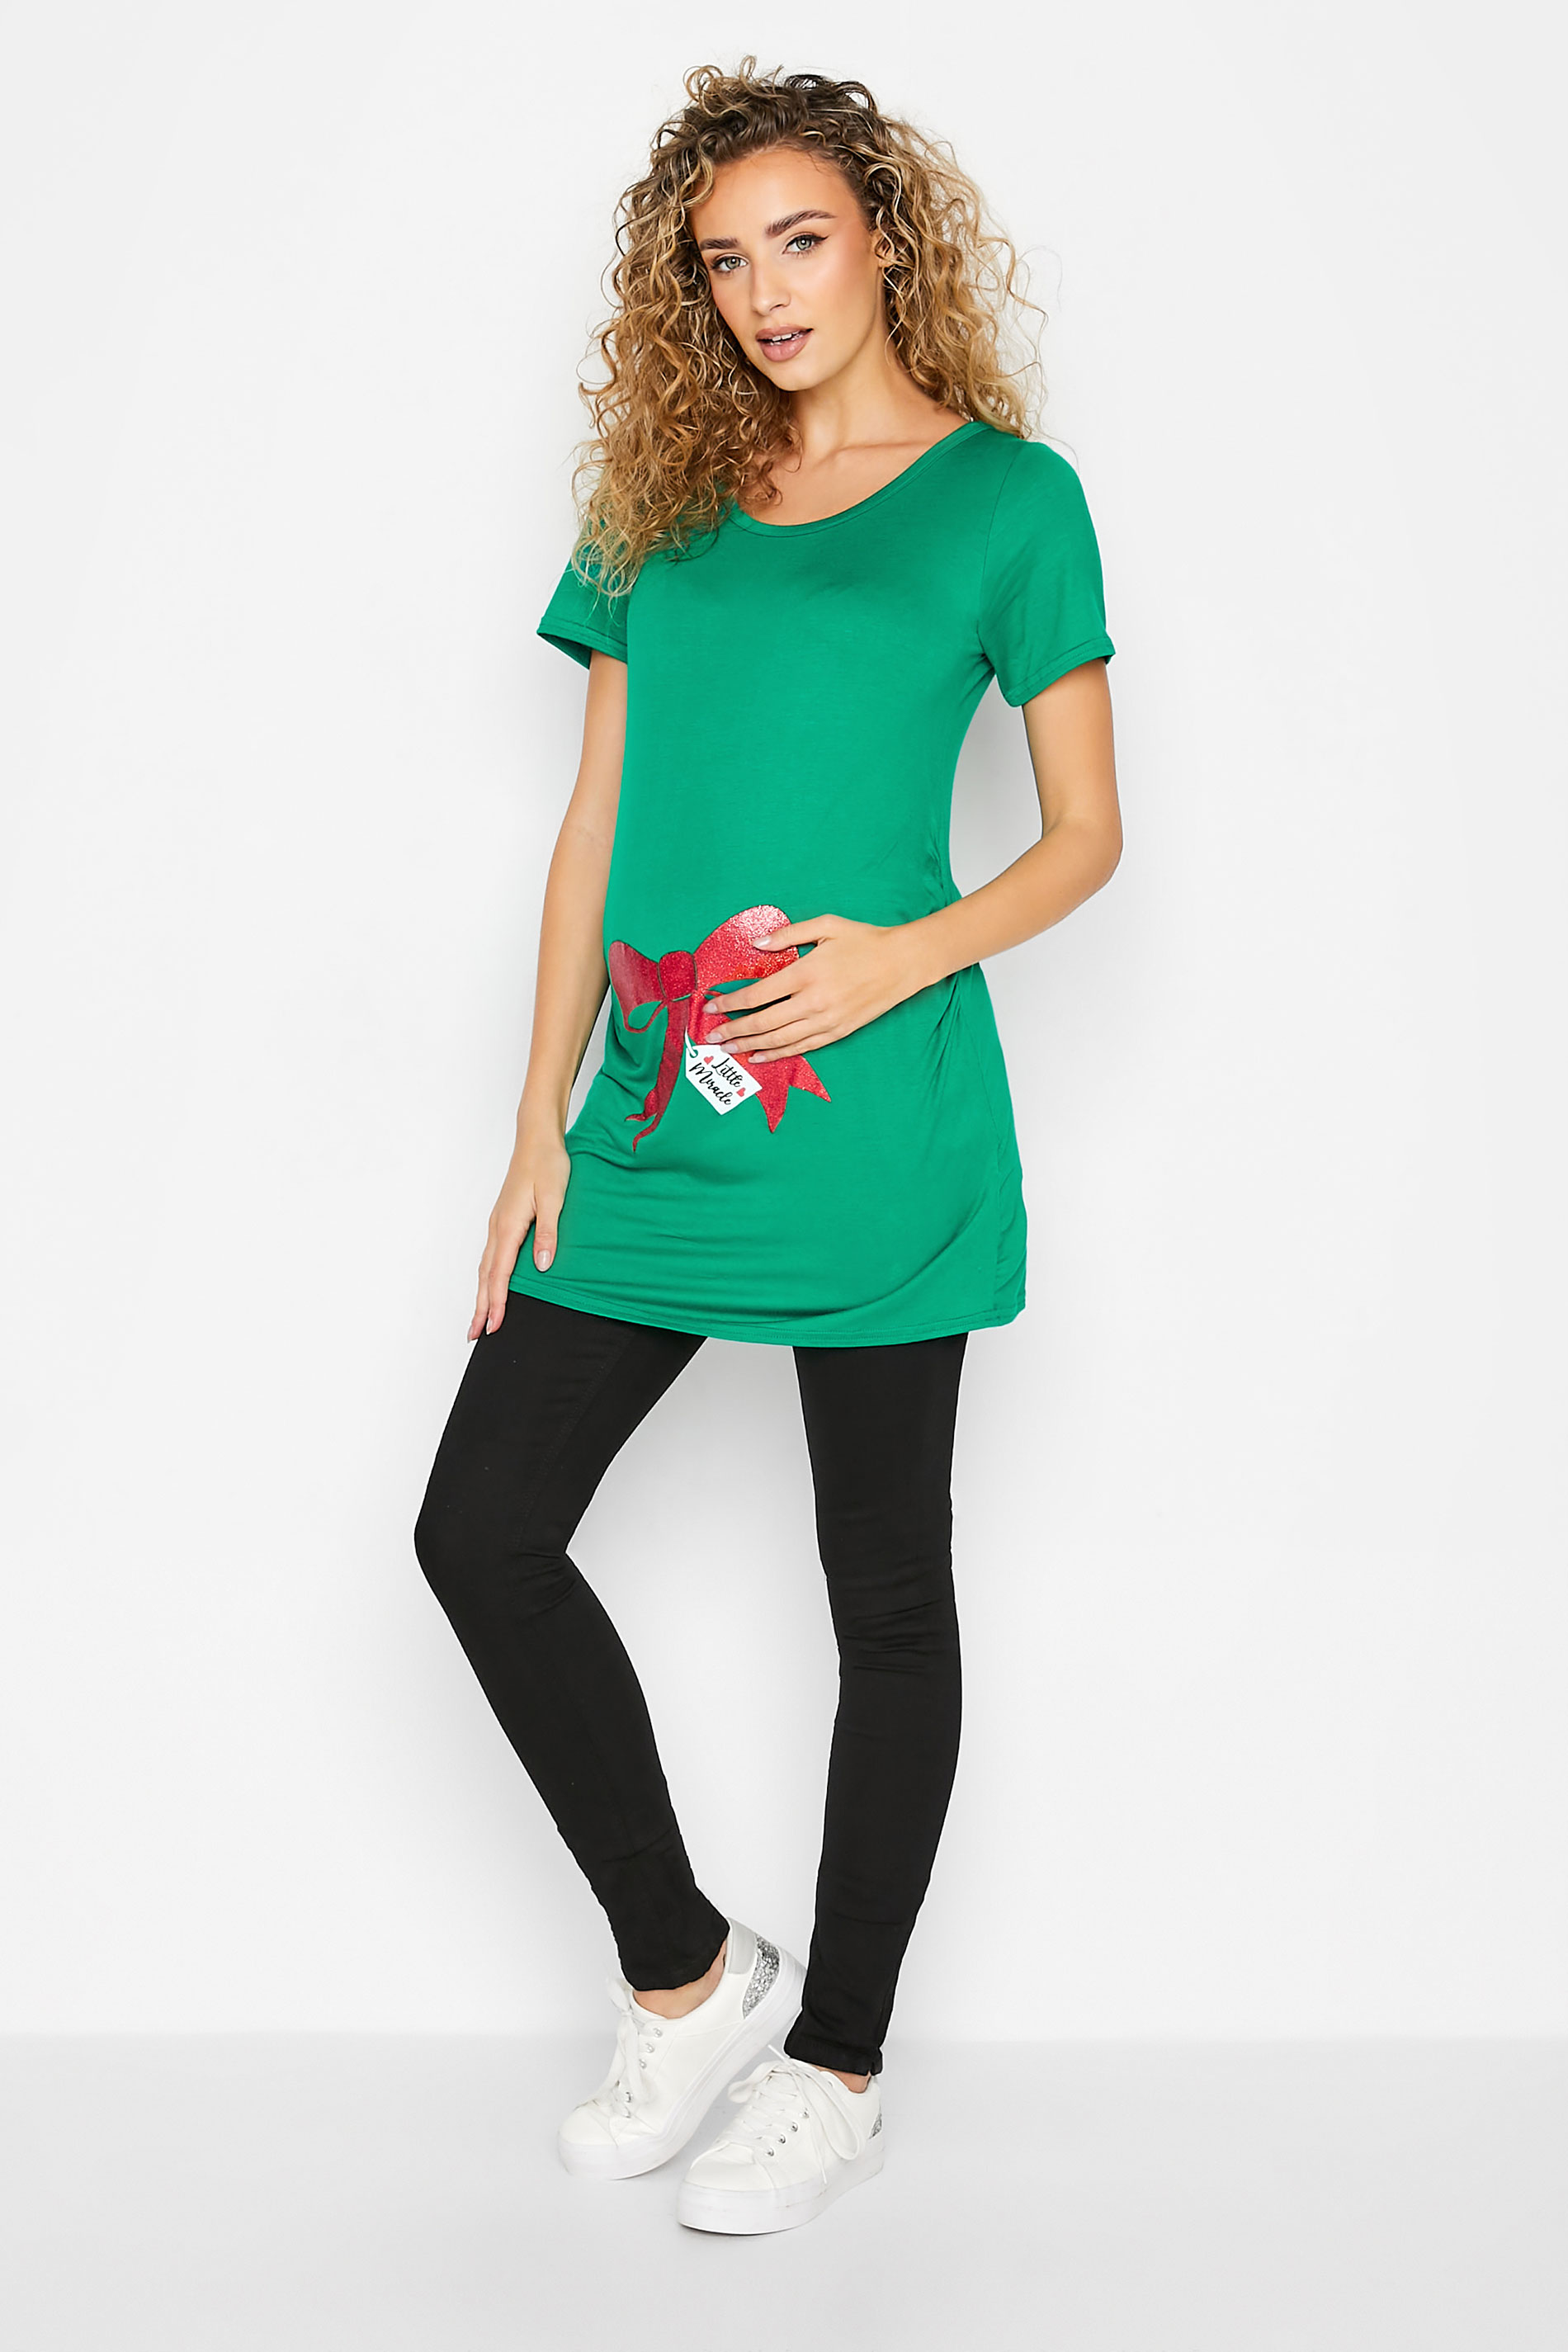 LTS Tall Maternity Green & Red Bow Print 'Little Miracle' Christmas T-shirt | Long Tall Sally 2